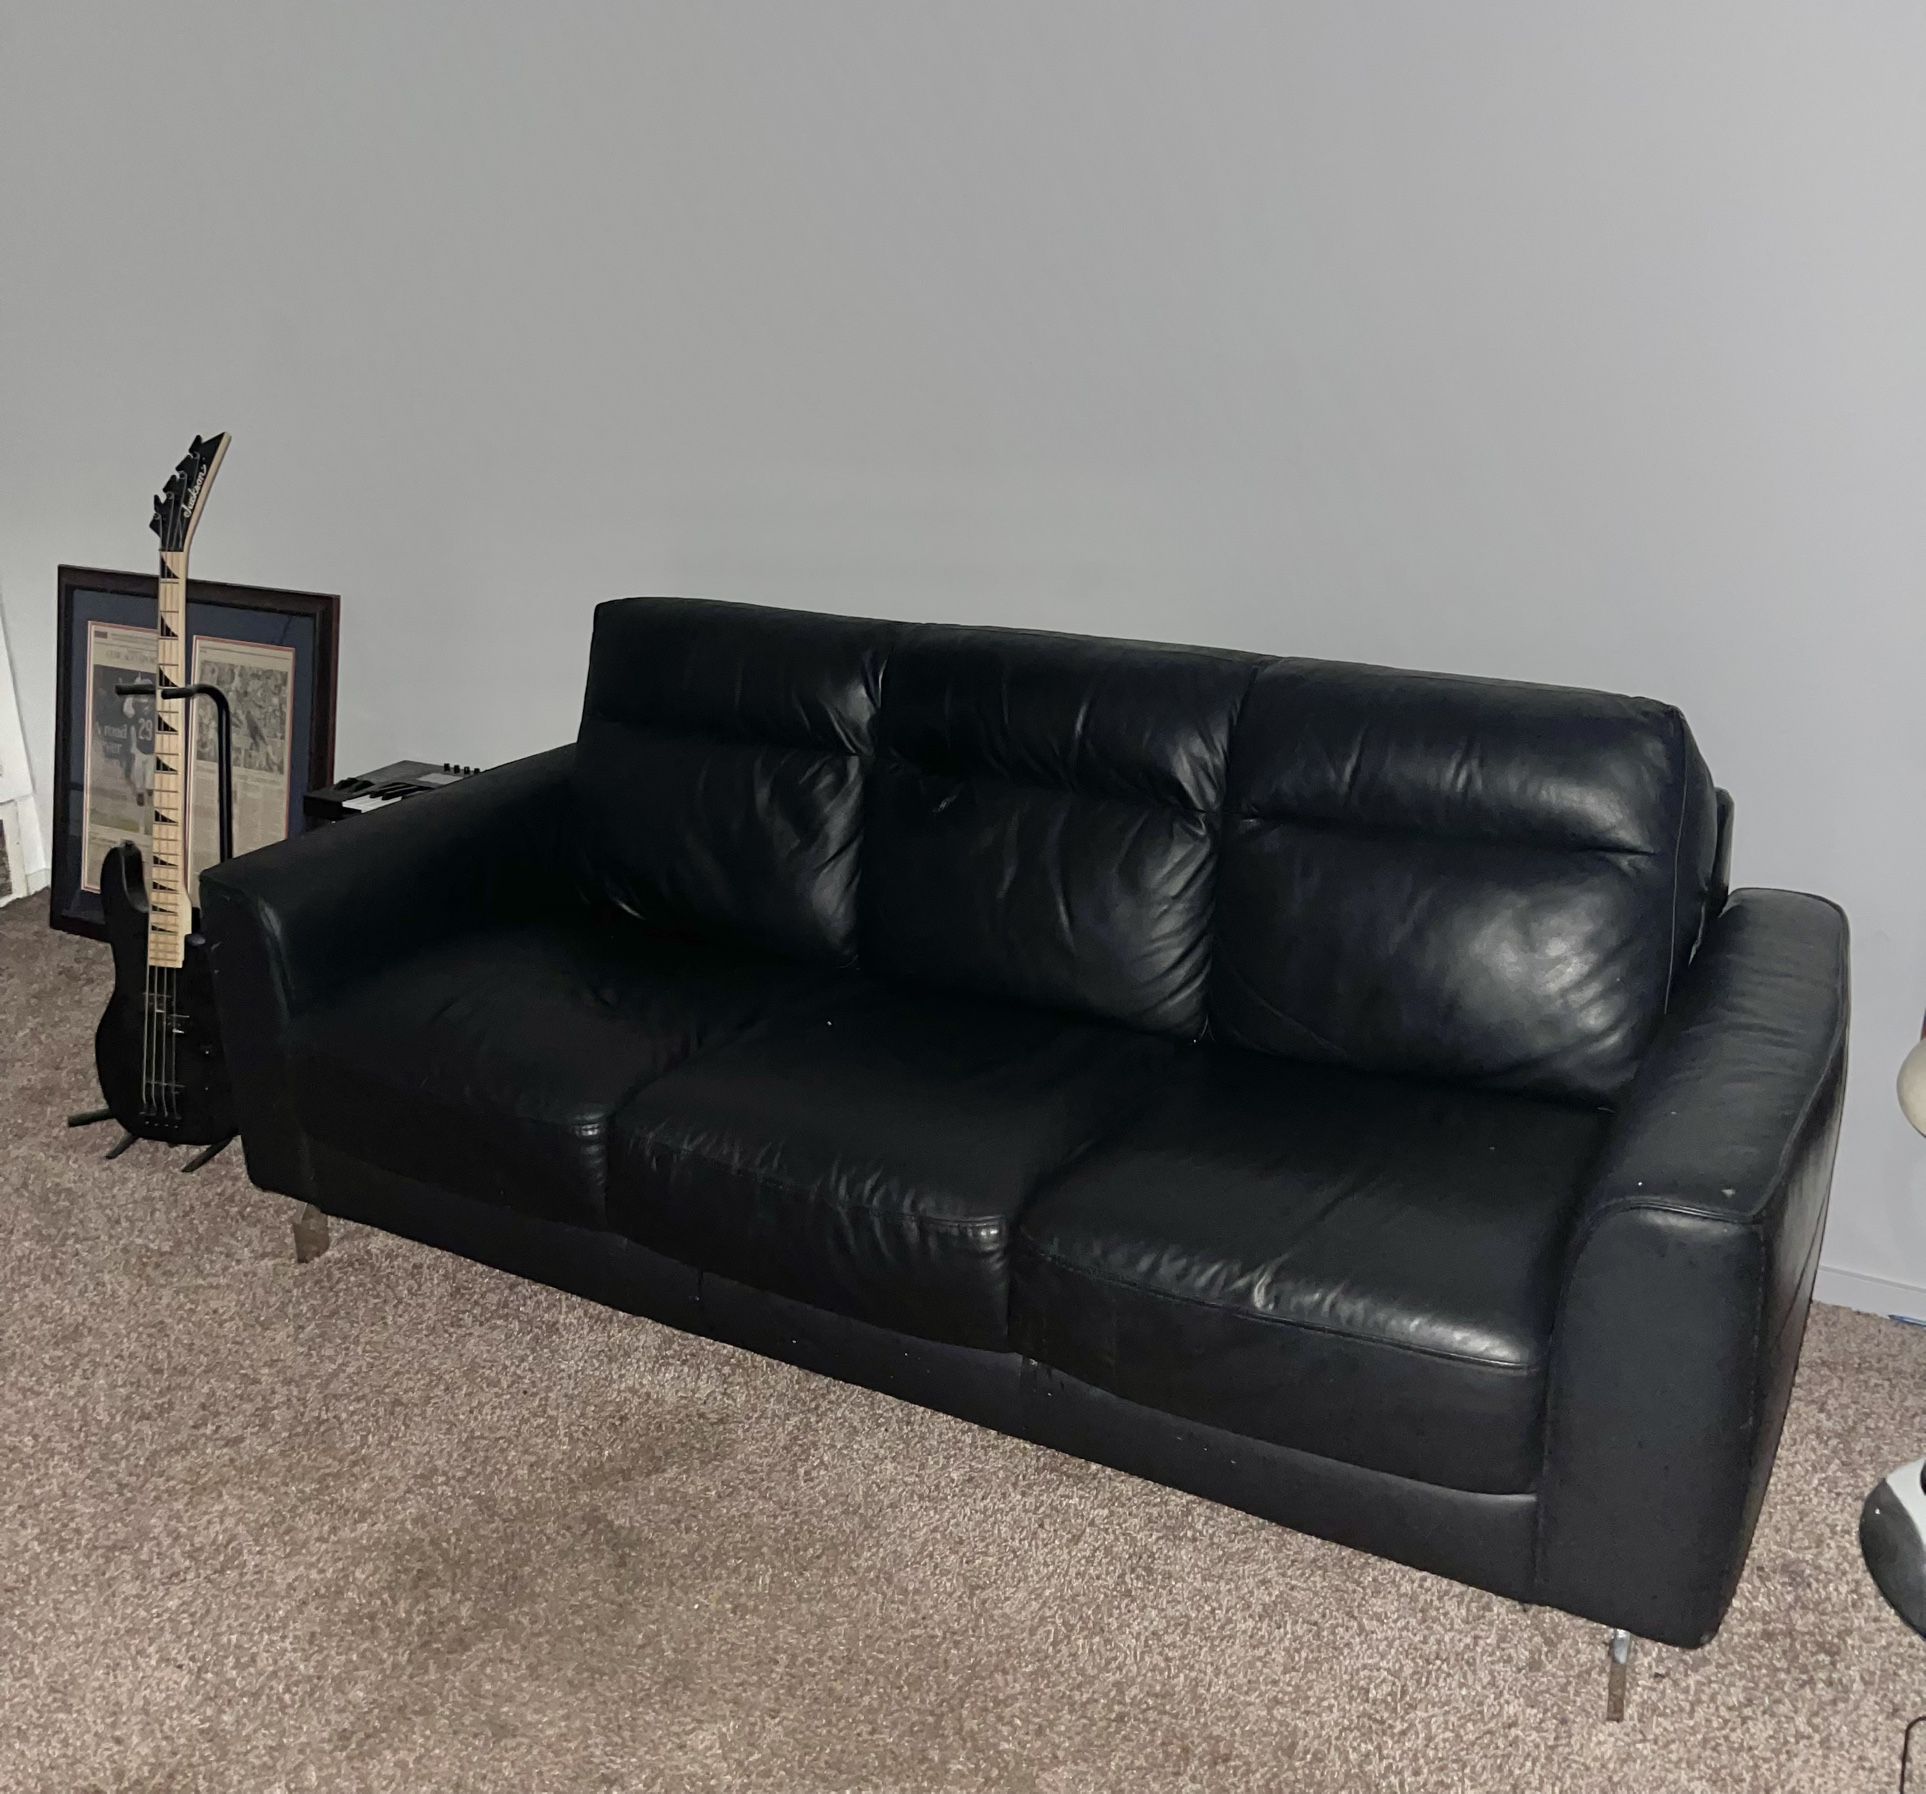 LOW PRICE! 3 Seater Black Leather Couch